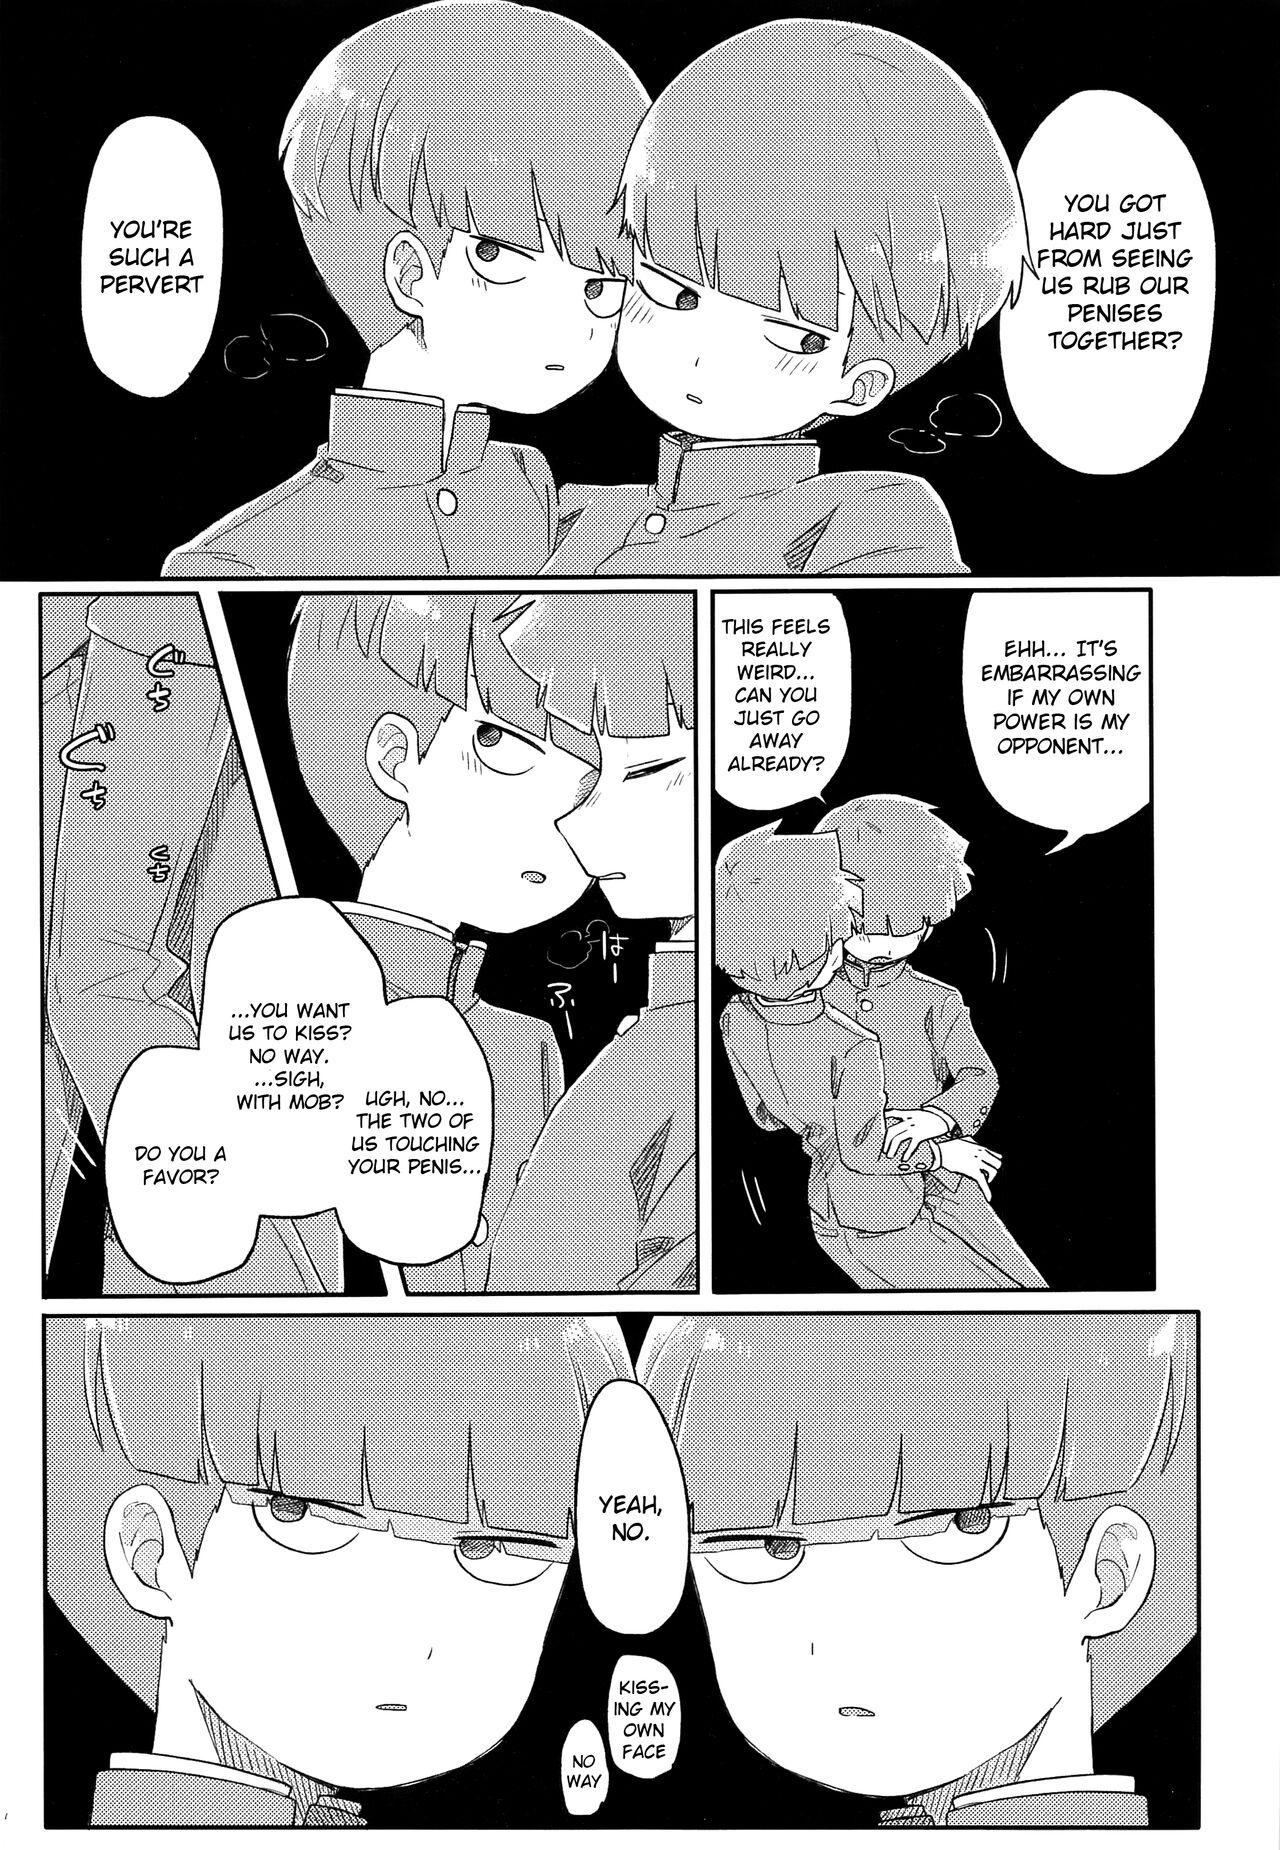 Blonde Dare? | Who? - Mob psycho 100 Chicks - Page 9